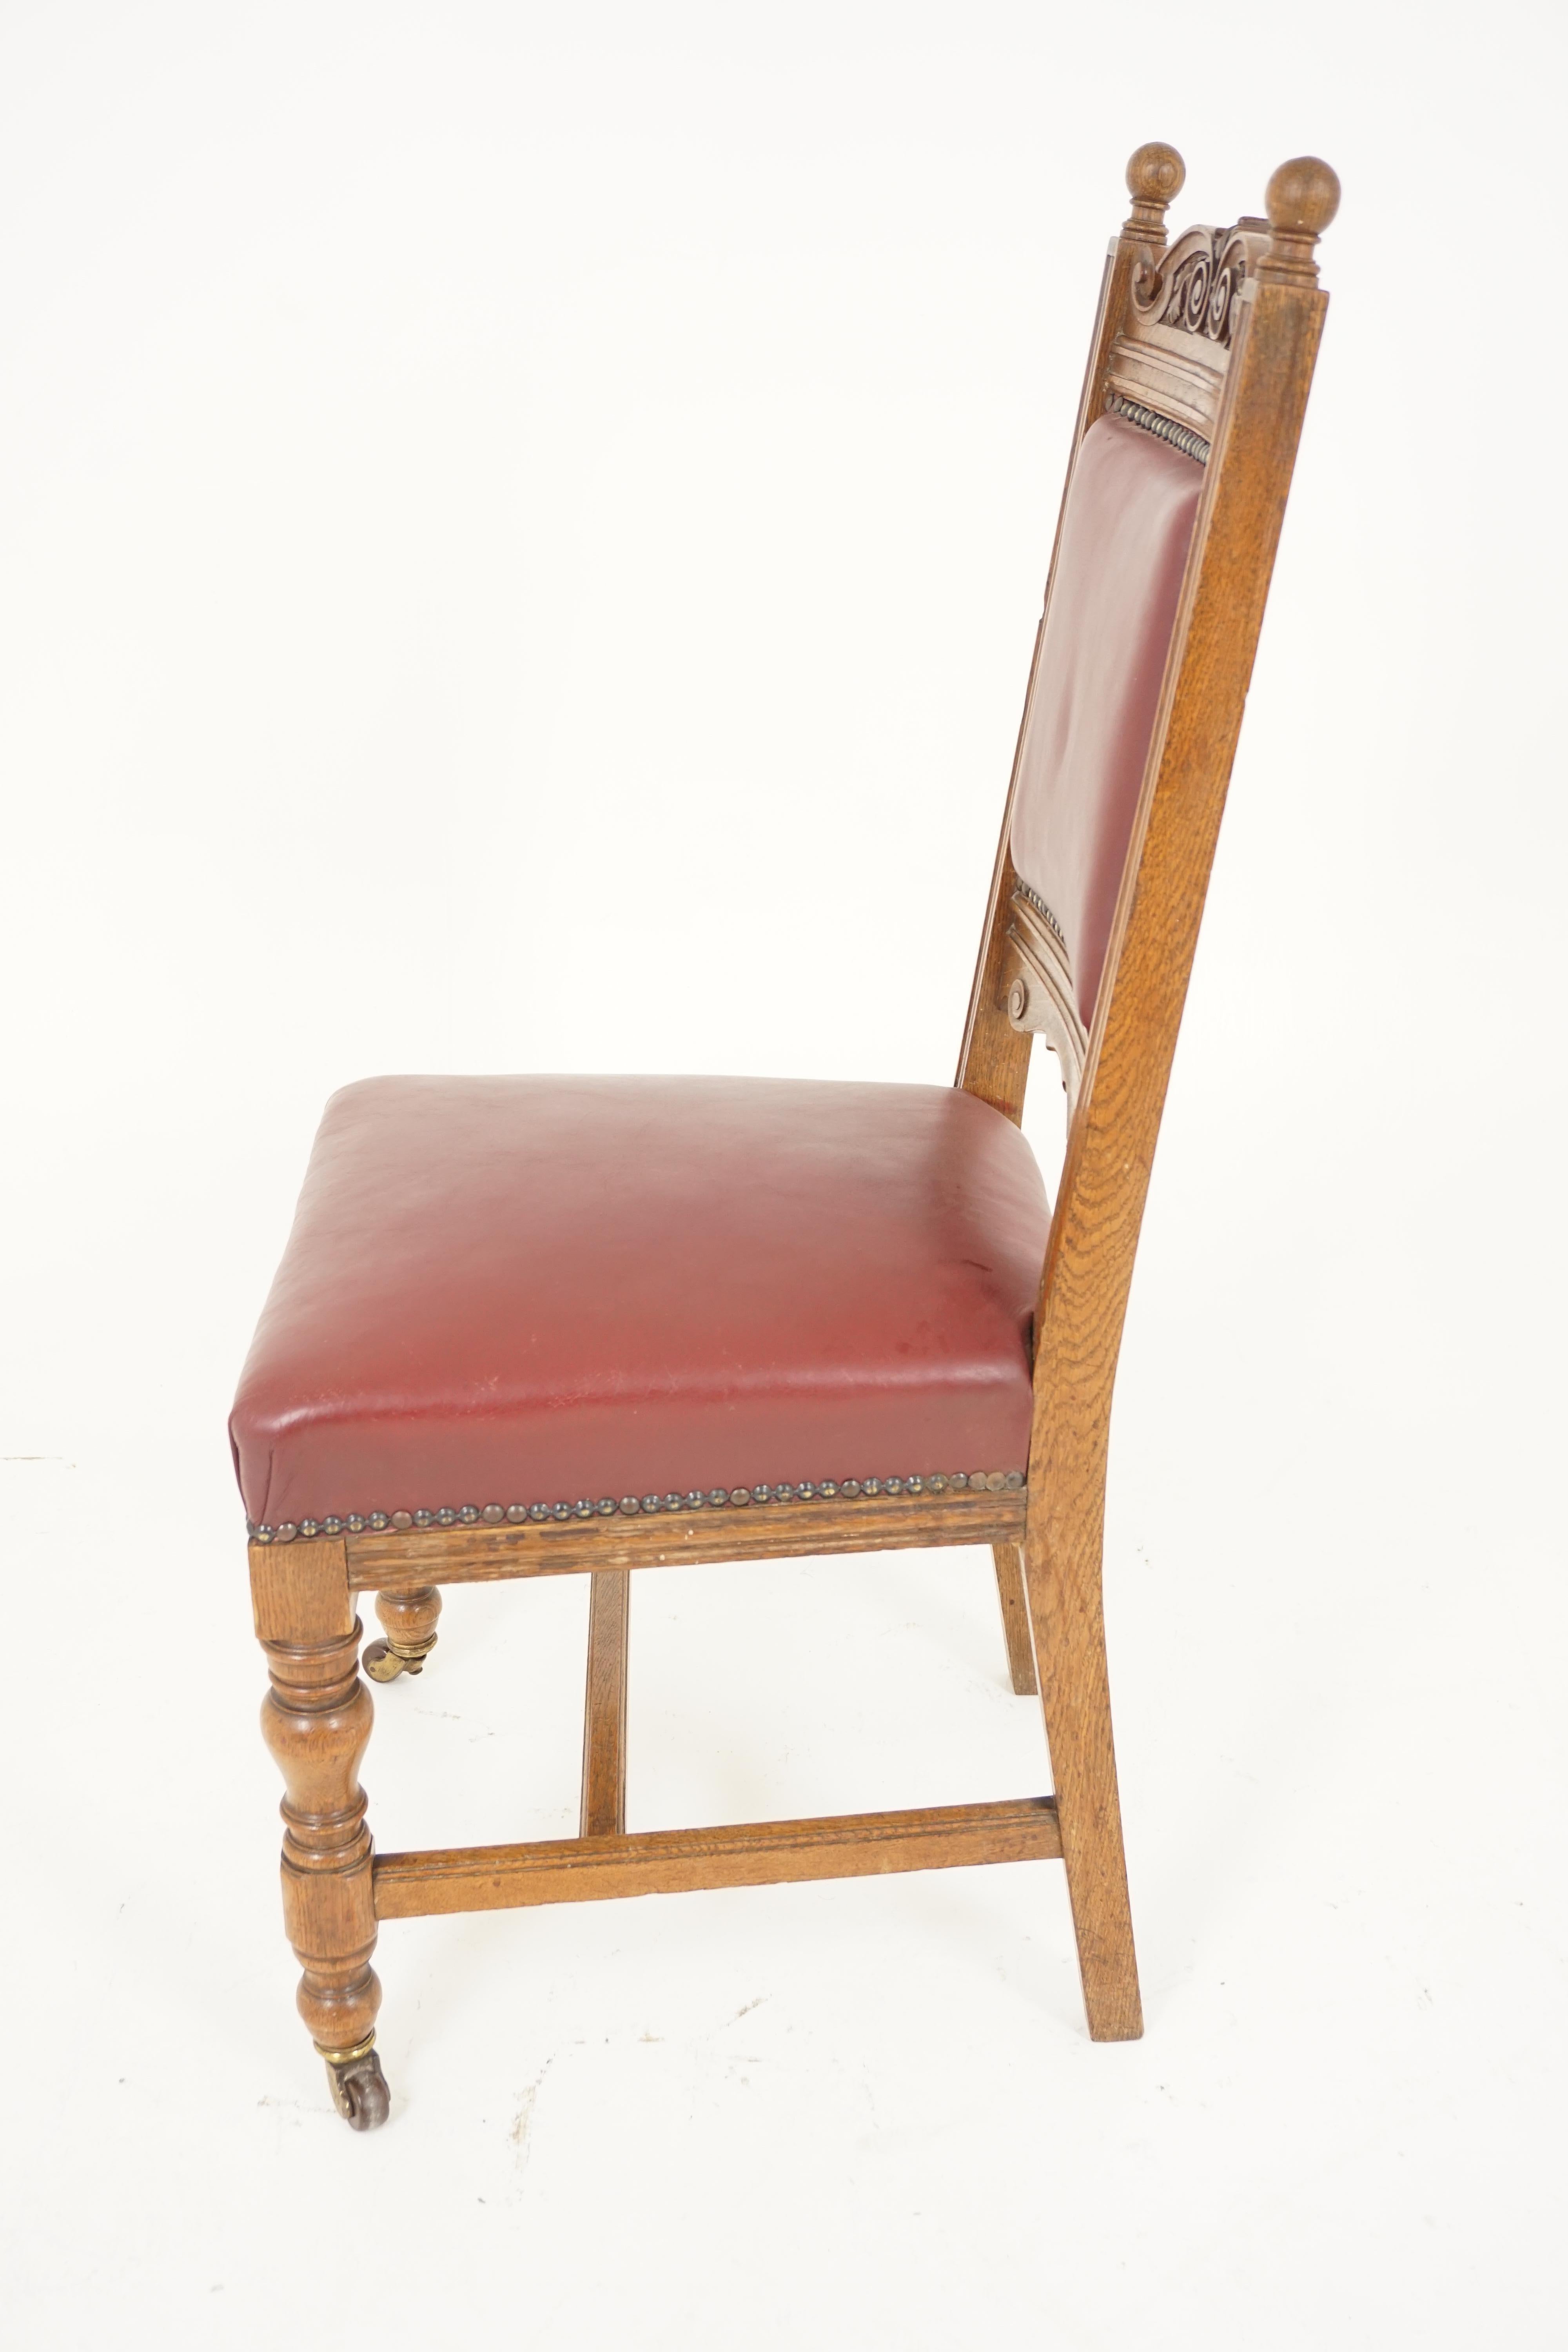 Scottish Set of Four Victorian Carved Padded Back Oak Dining Chairs, Scotland 1910, B2044